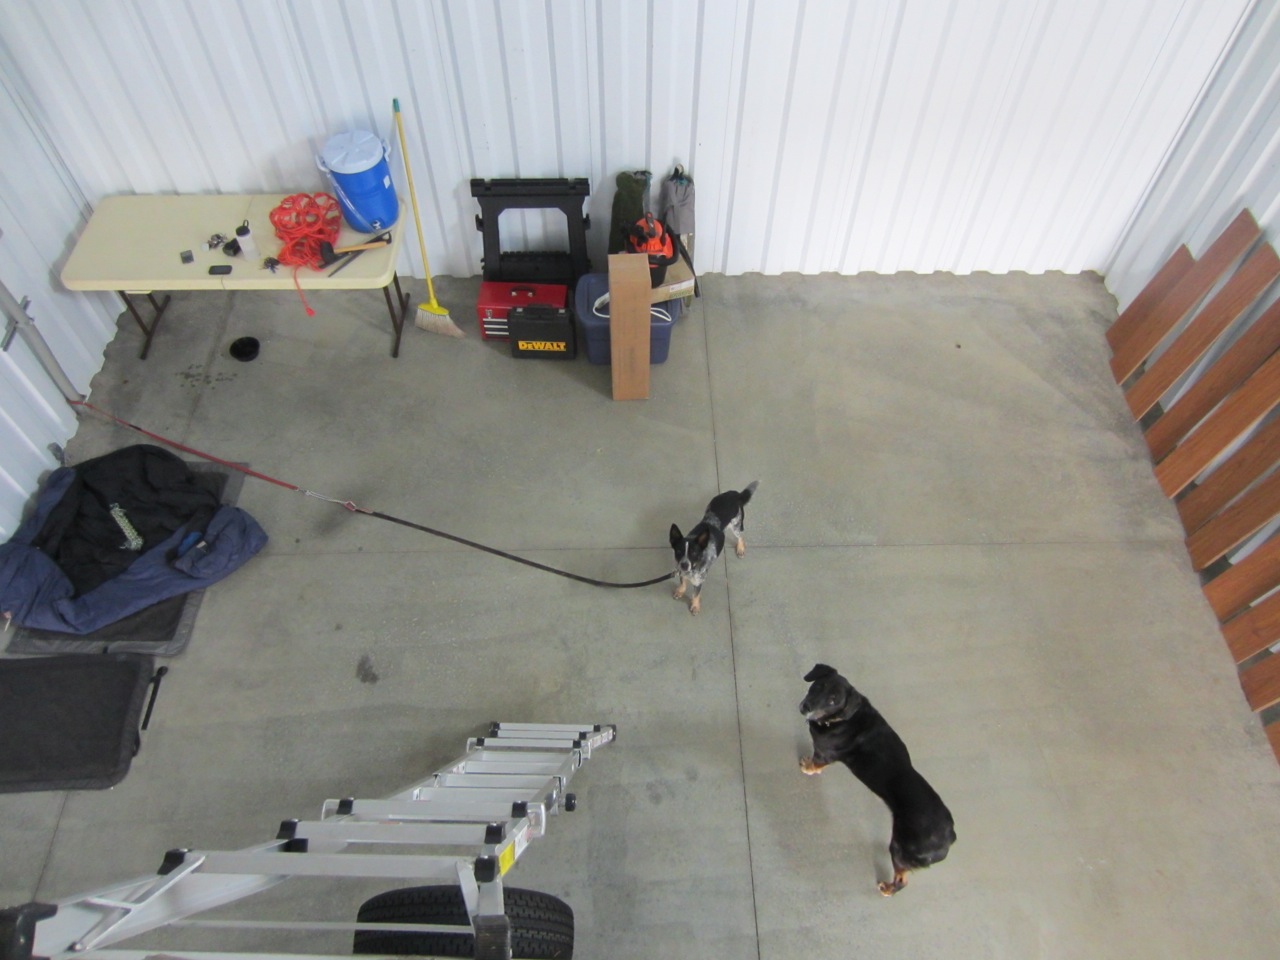   The dogs hung out below waiting for us. Tyki, a dog we're fostering, is on the leash because the garage door is open.  